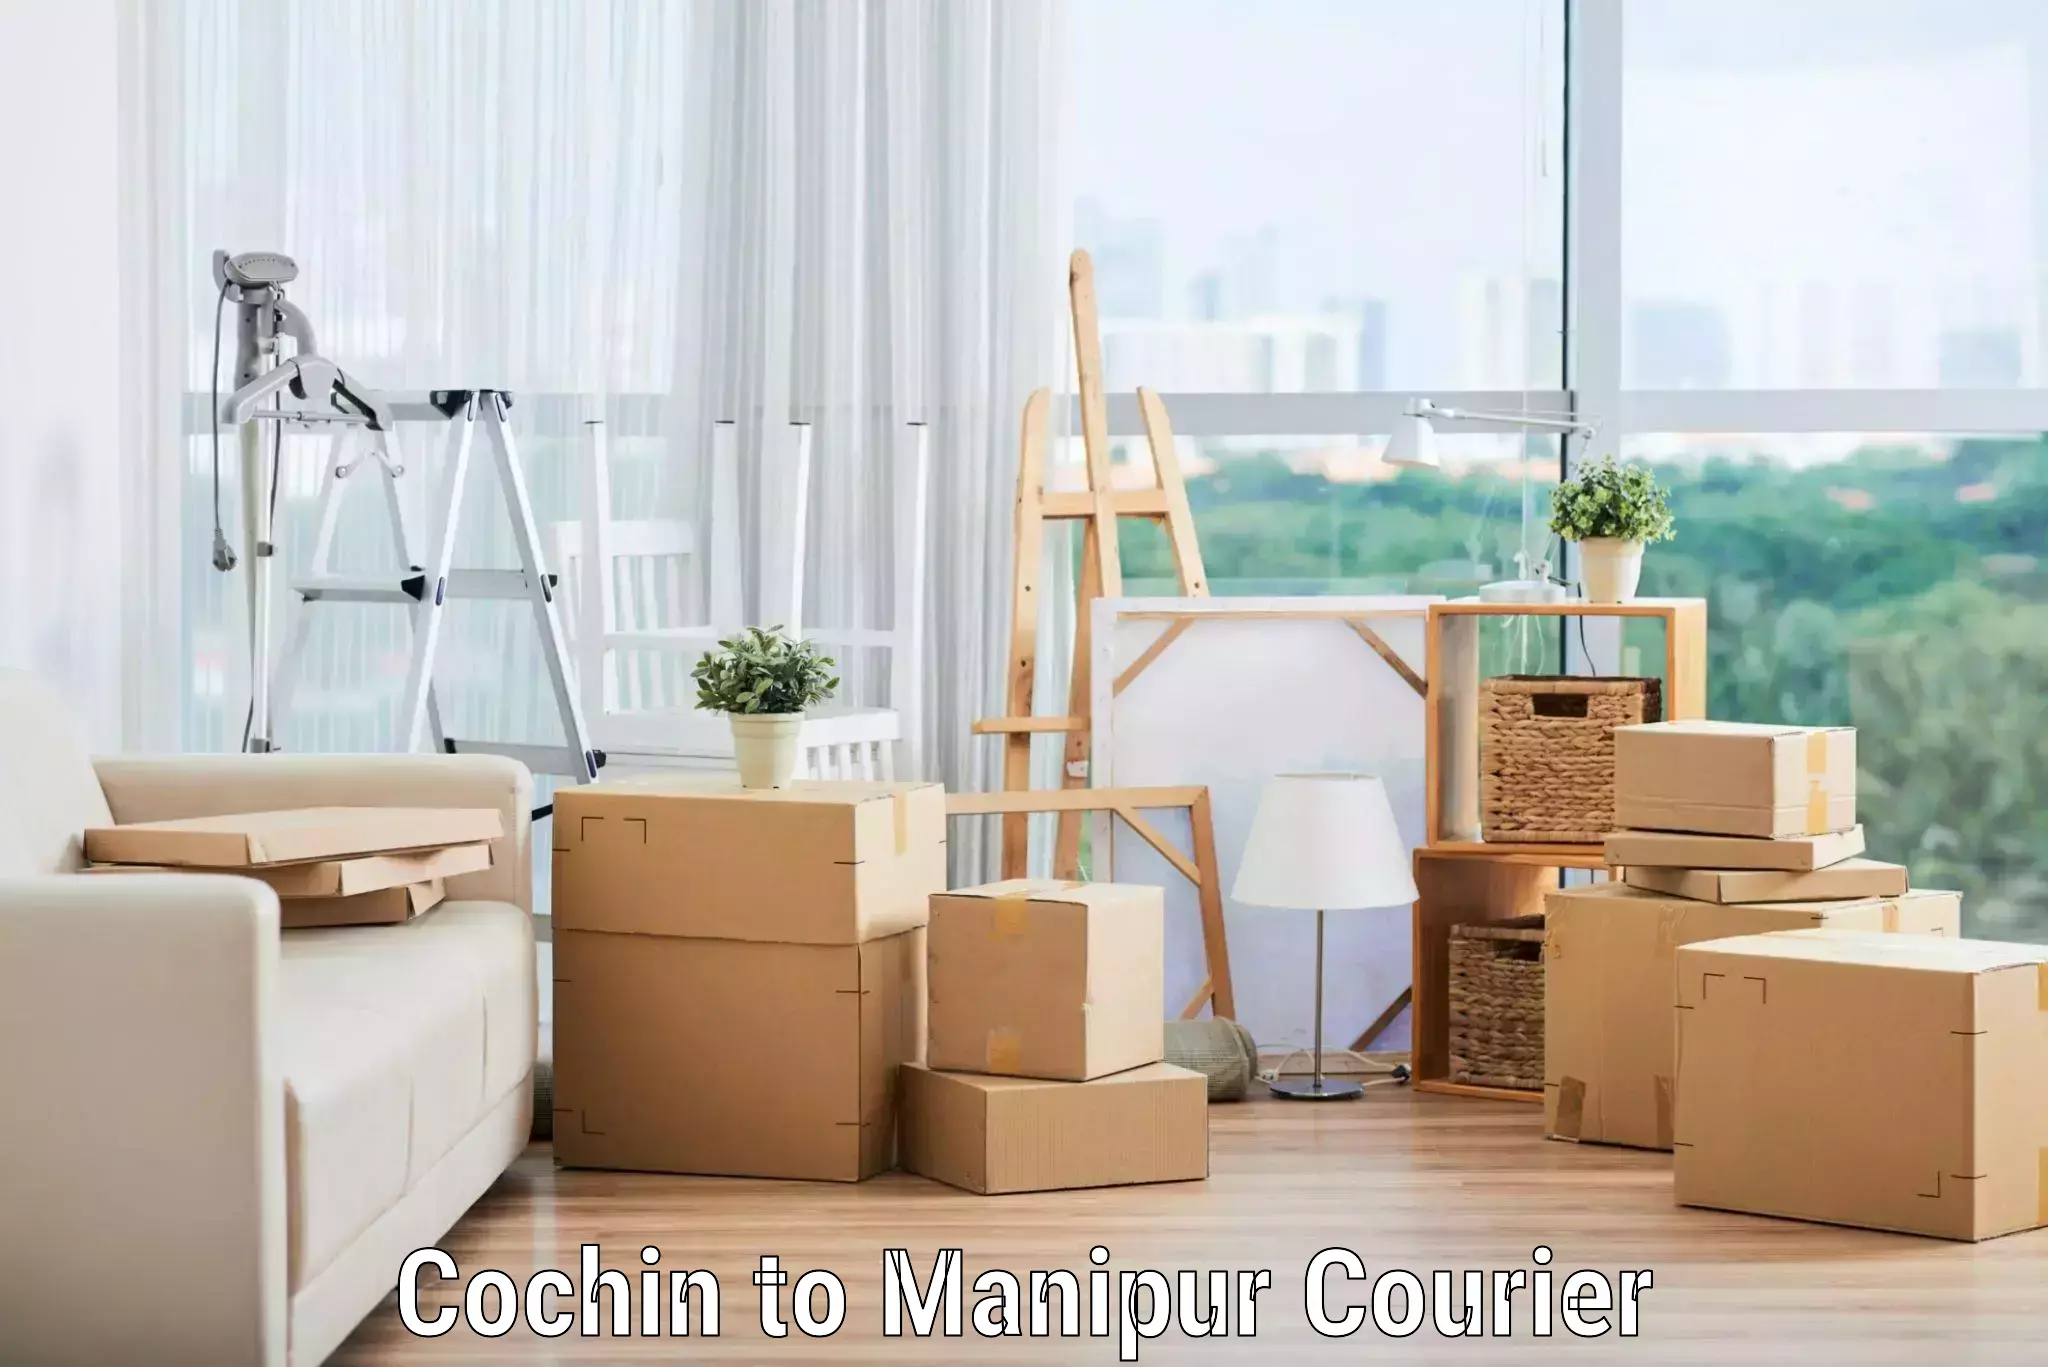 Furniture delivery service Cochin to Imphal